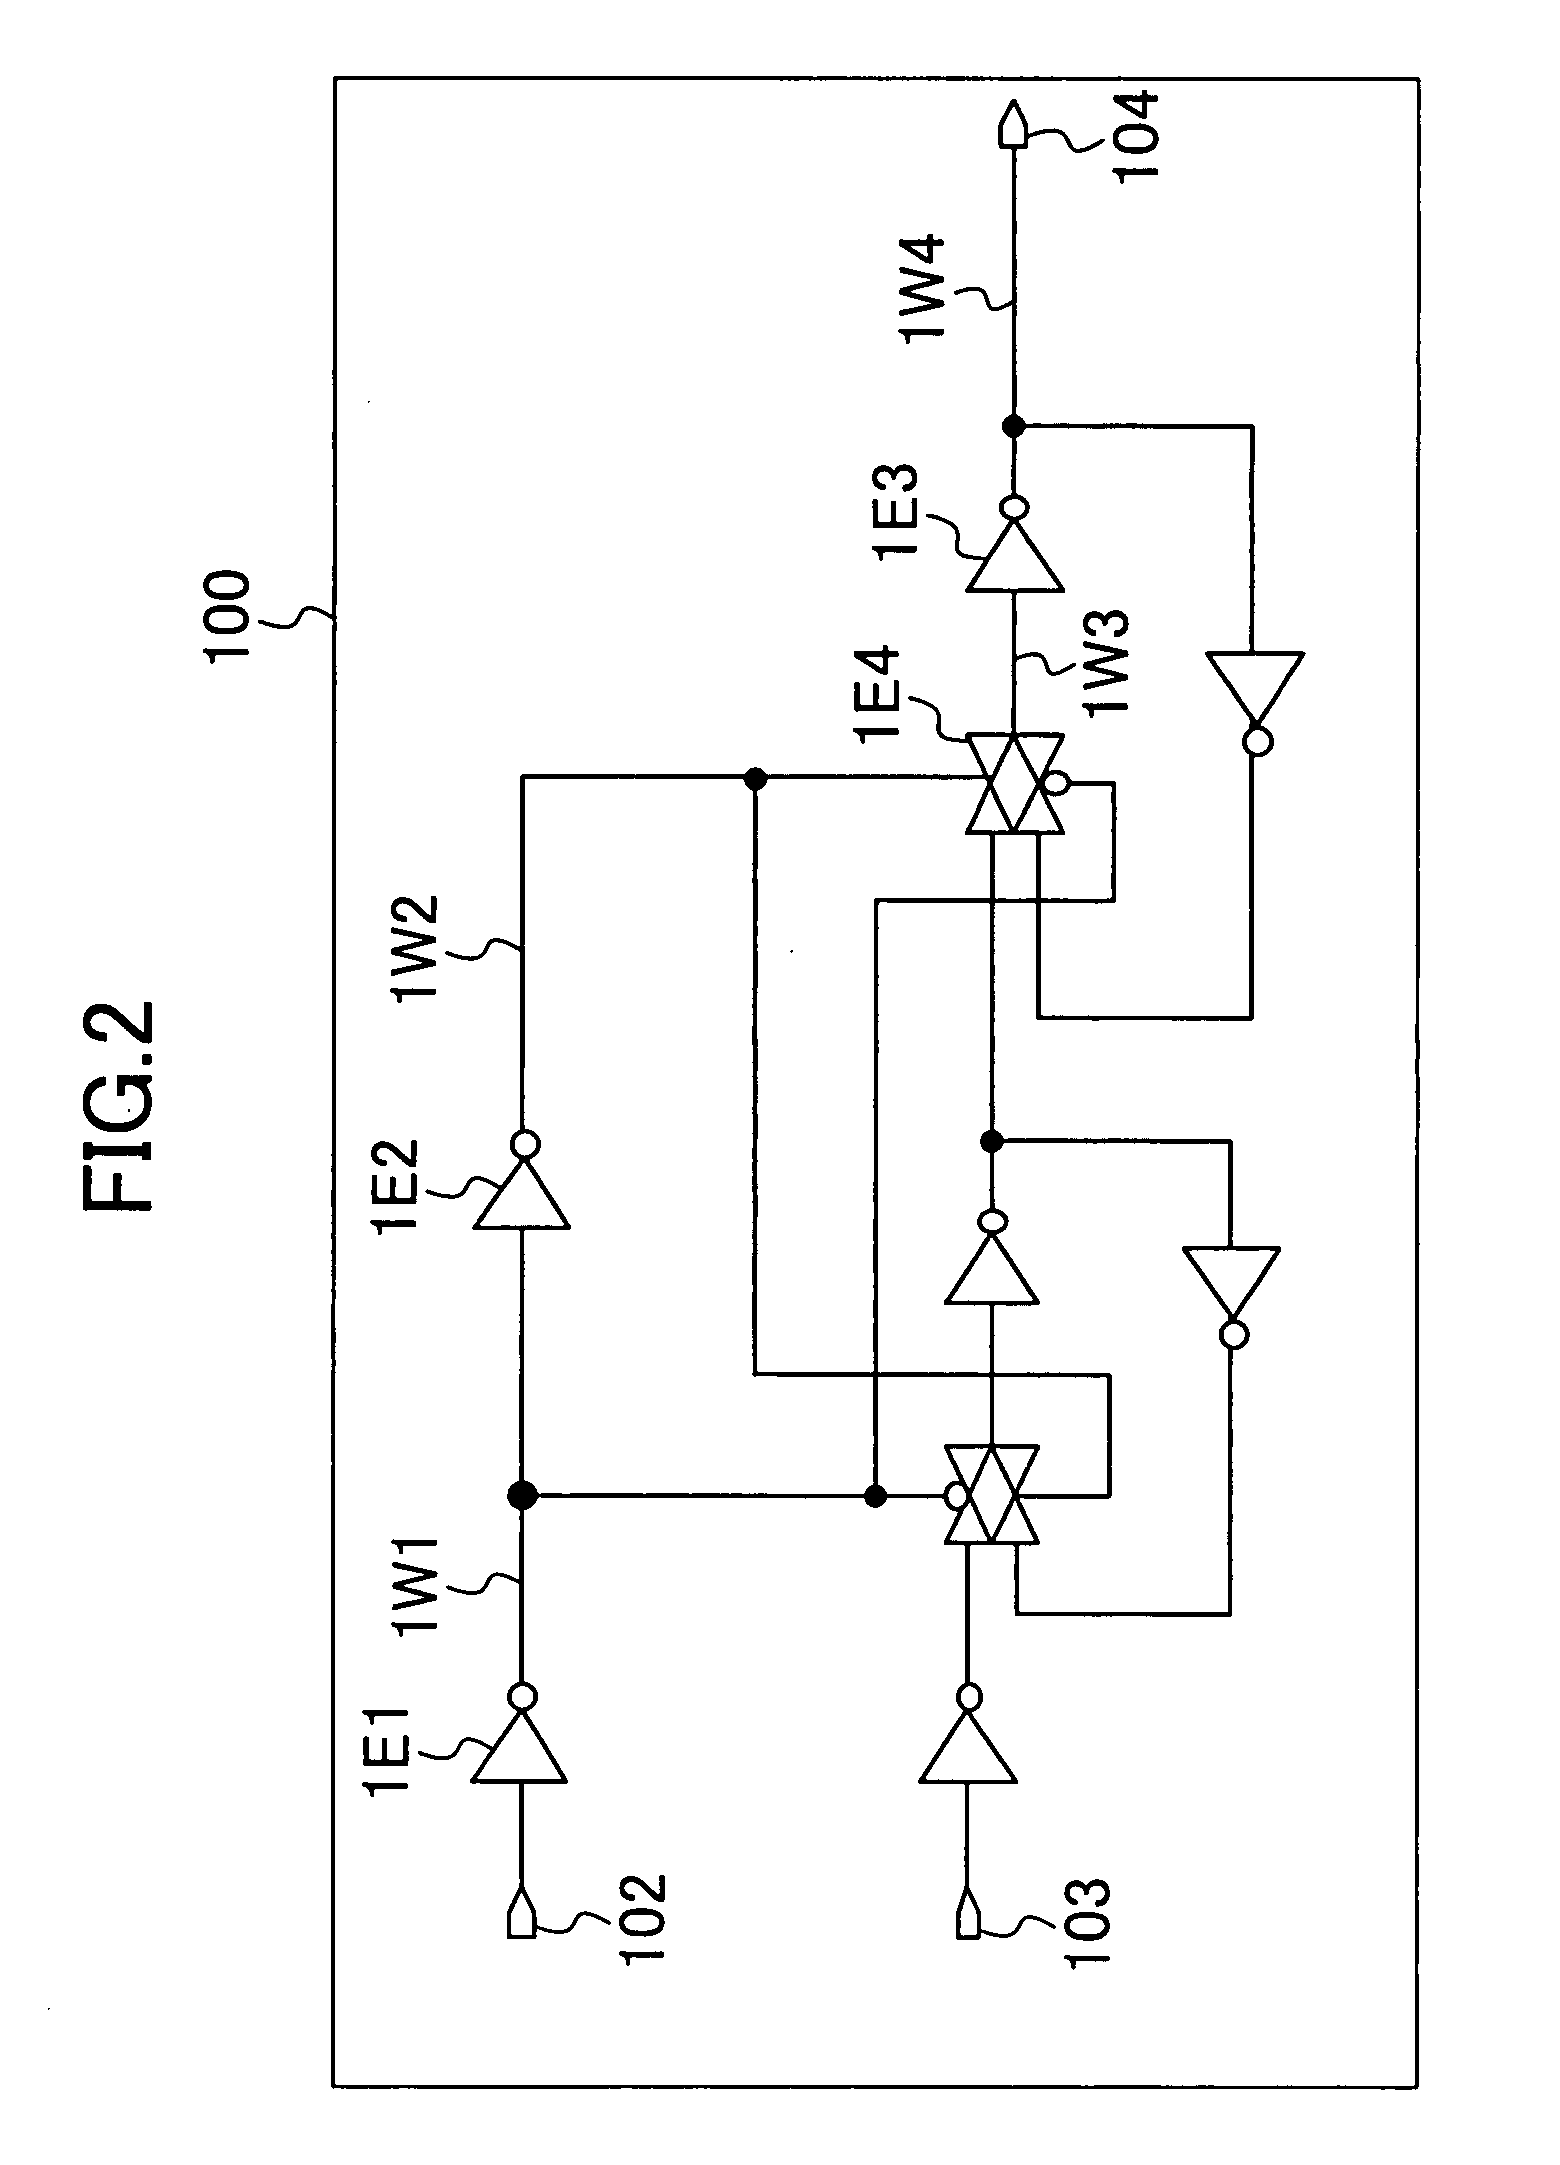 Method for analyzing characteristic of circuit included in integrated circuit based on process information and the like